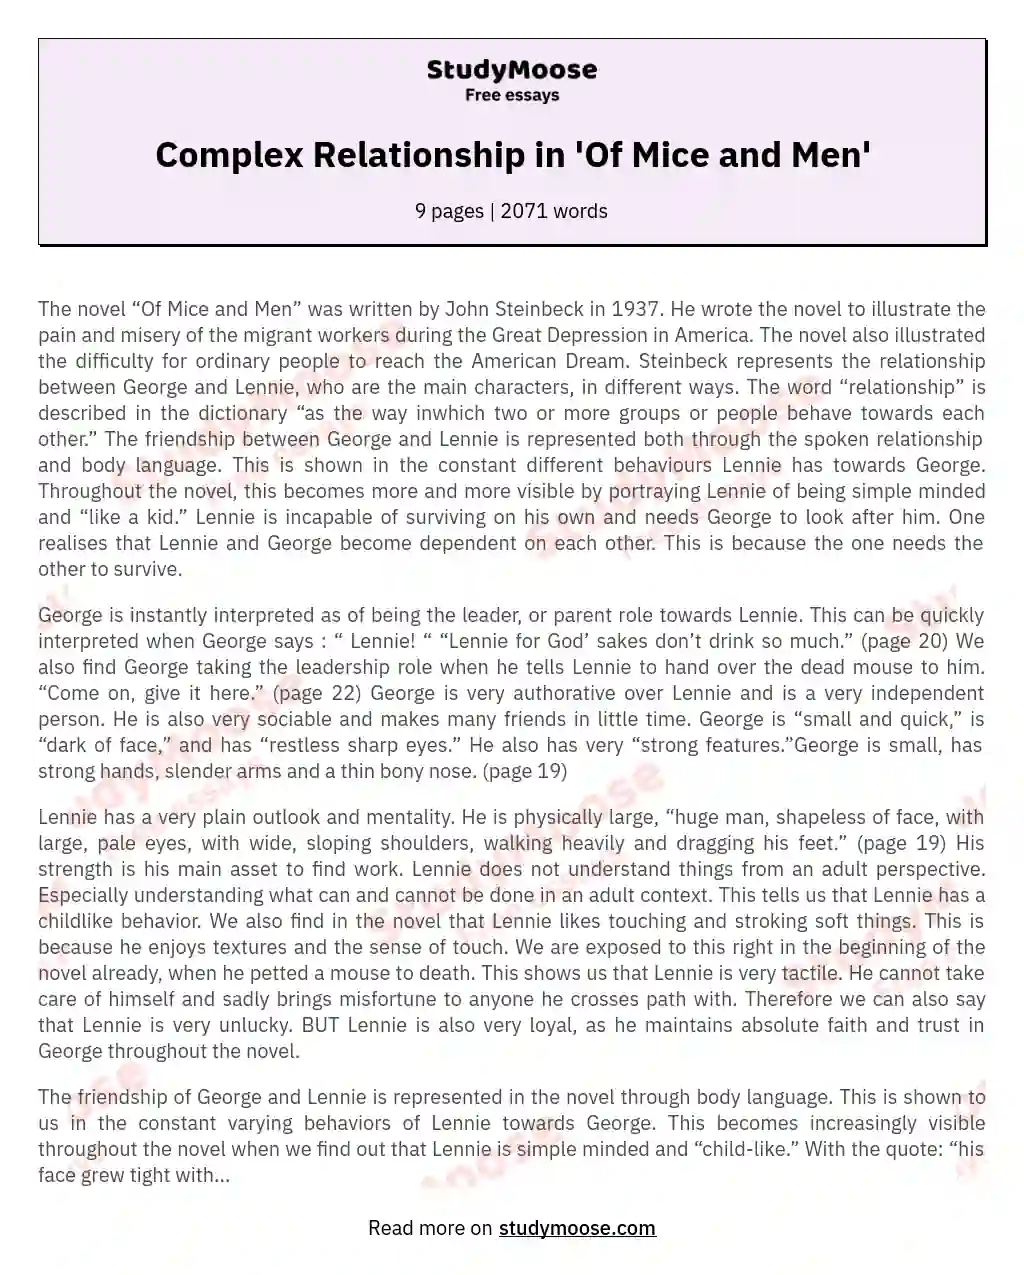 The Complex Relationship in "Of Mice and Men" essay